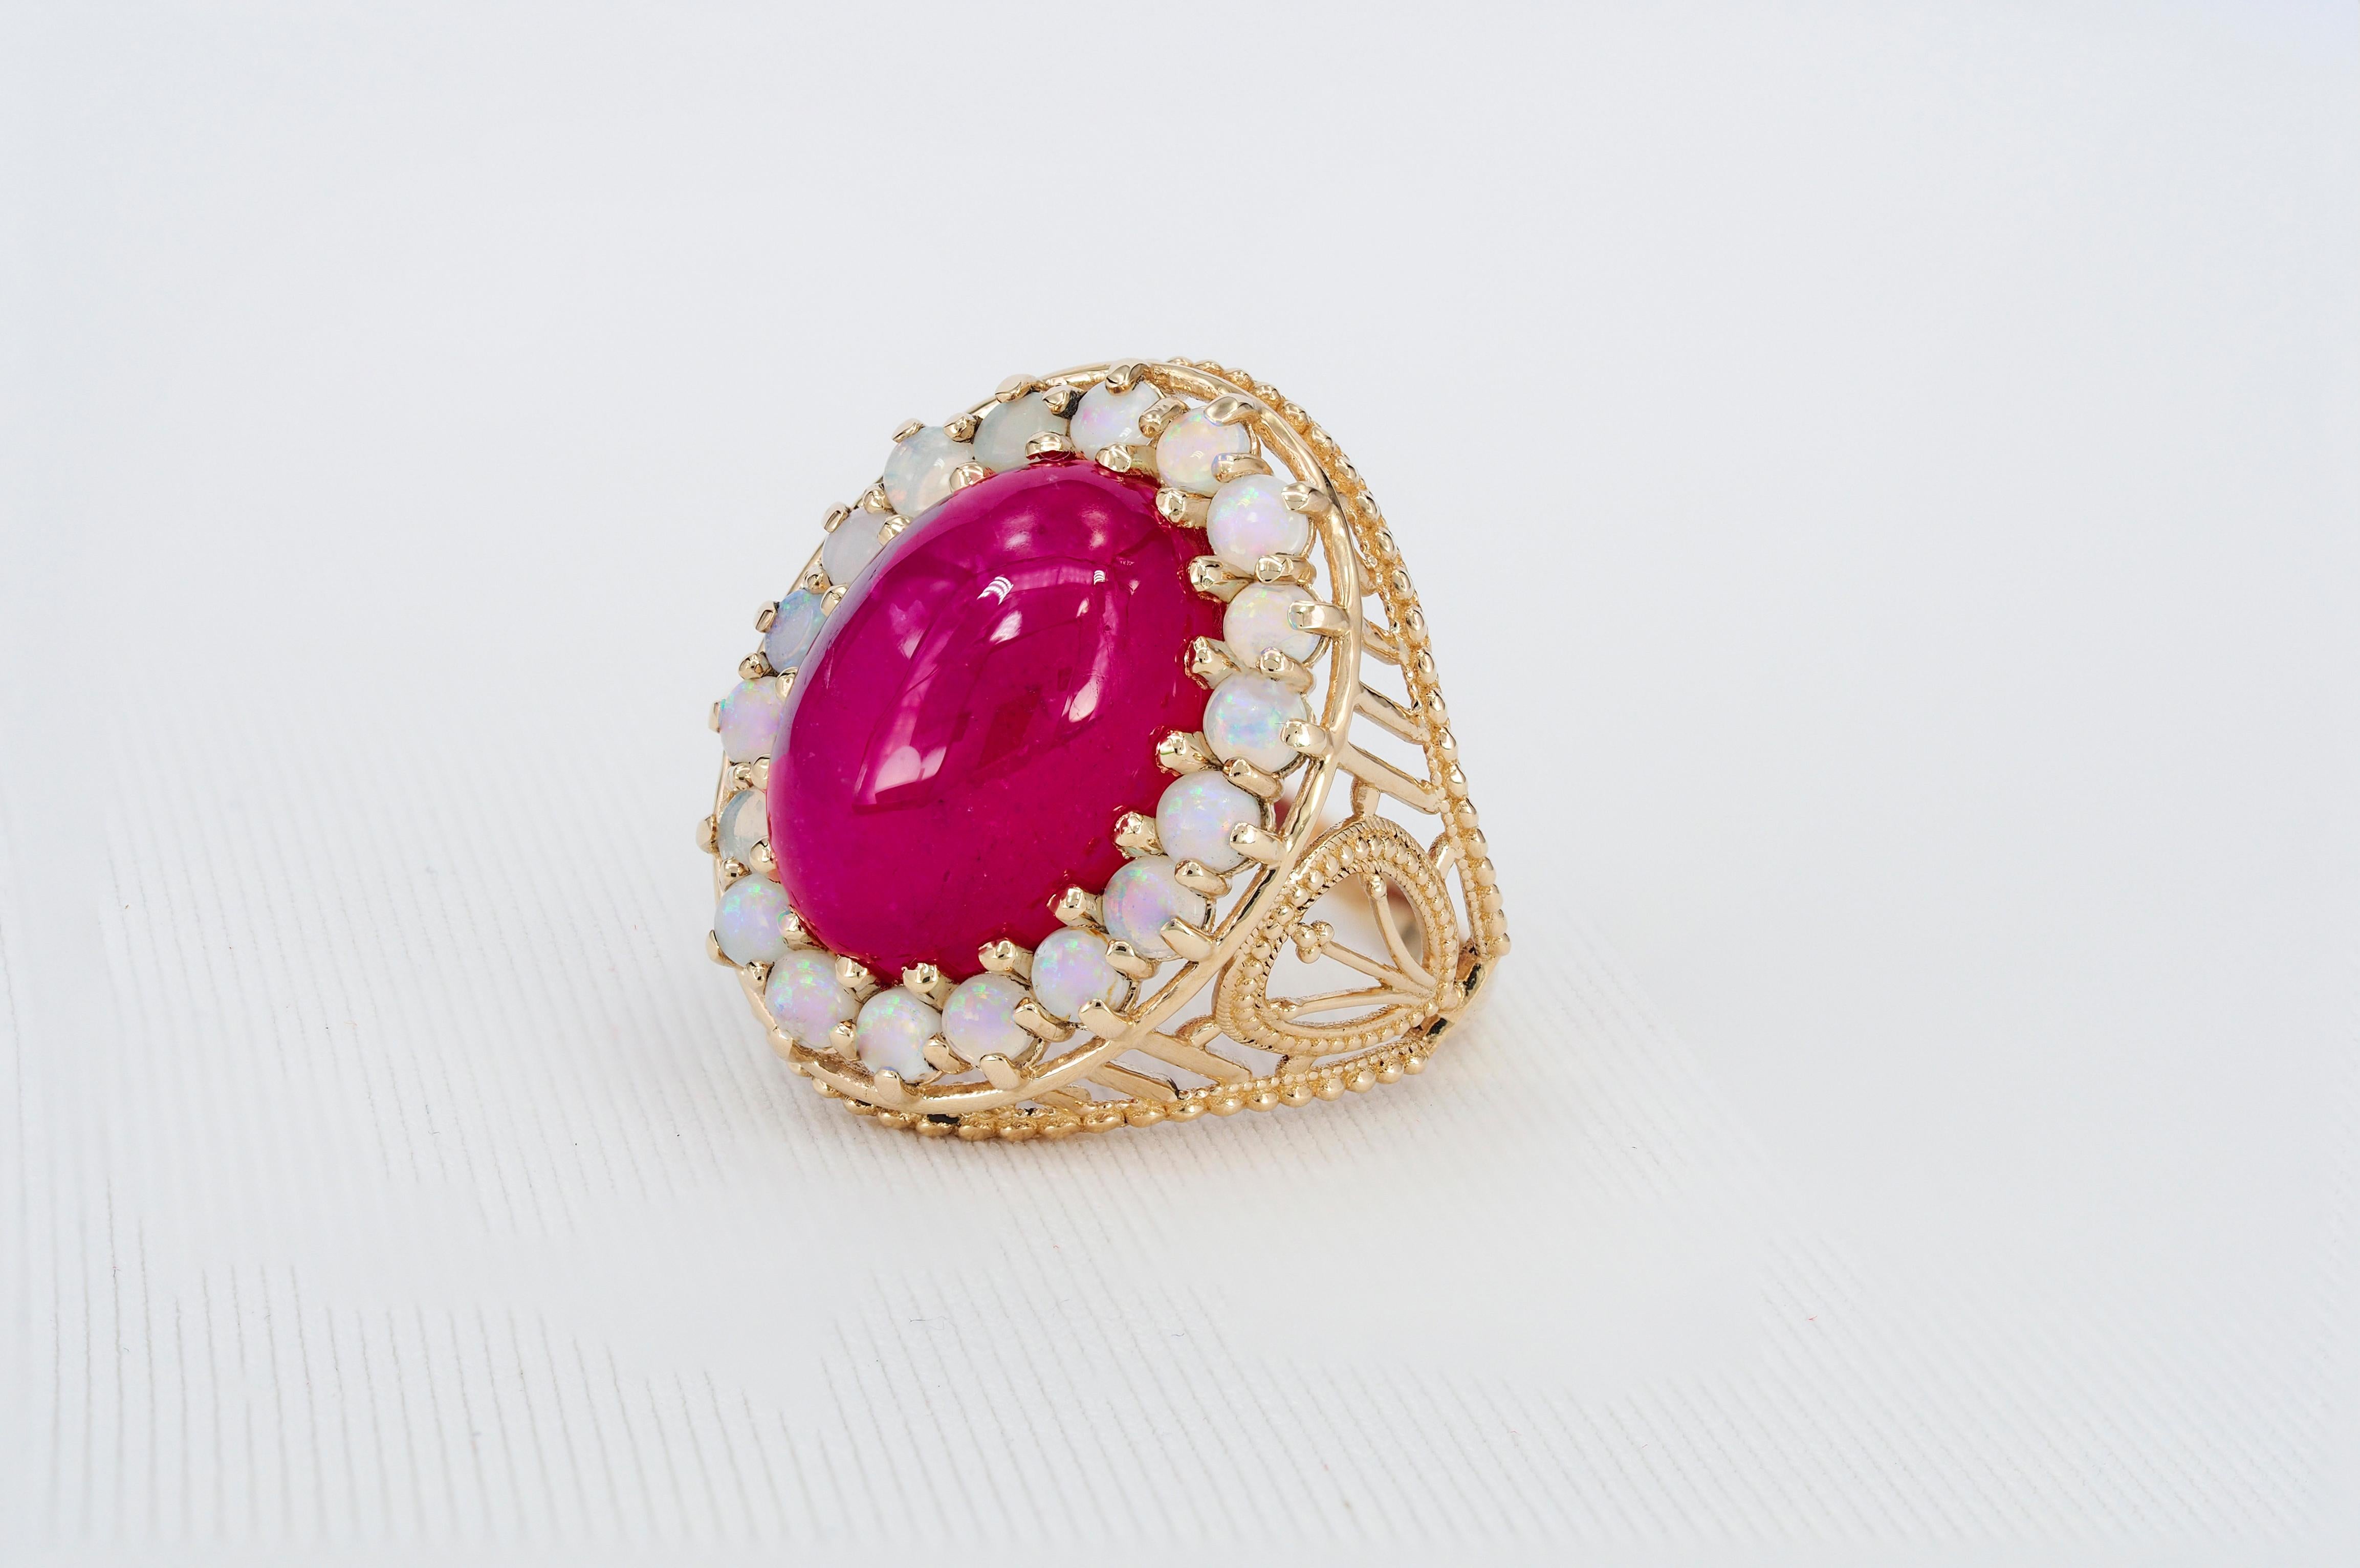 For Sale:  14k Massive Gold Ring with Cabochon Ruby and Opals, Vintage Inspired Ring 5